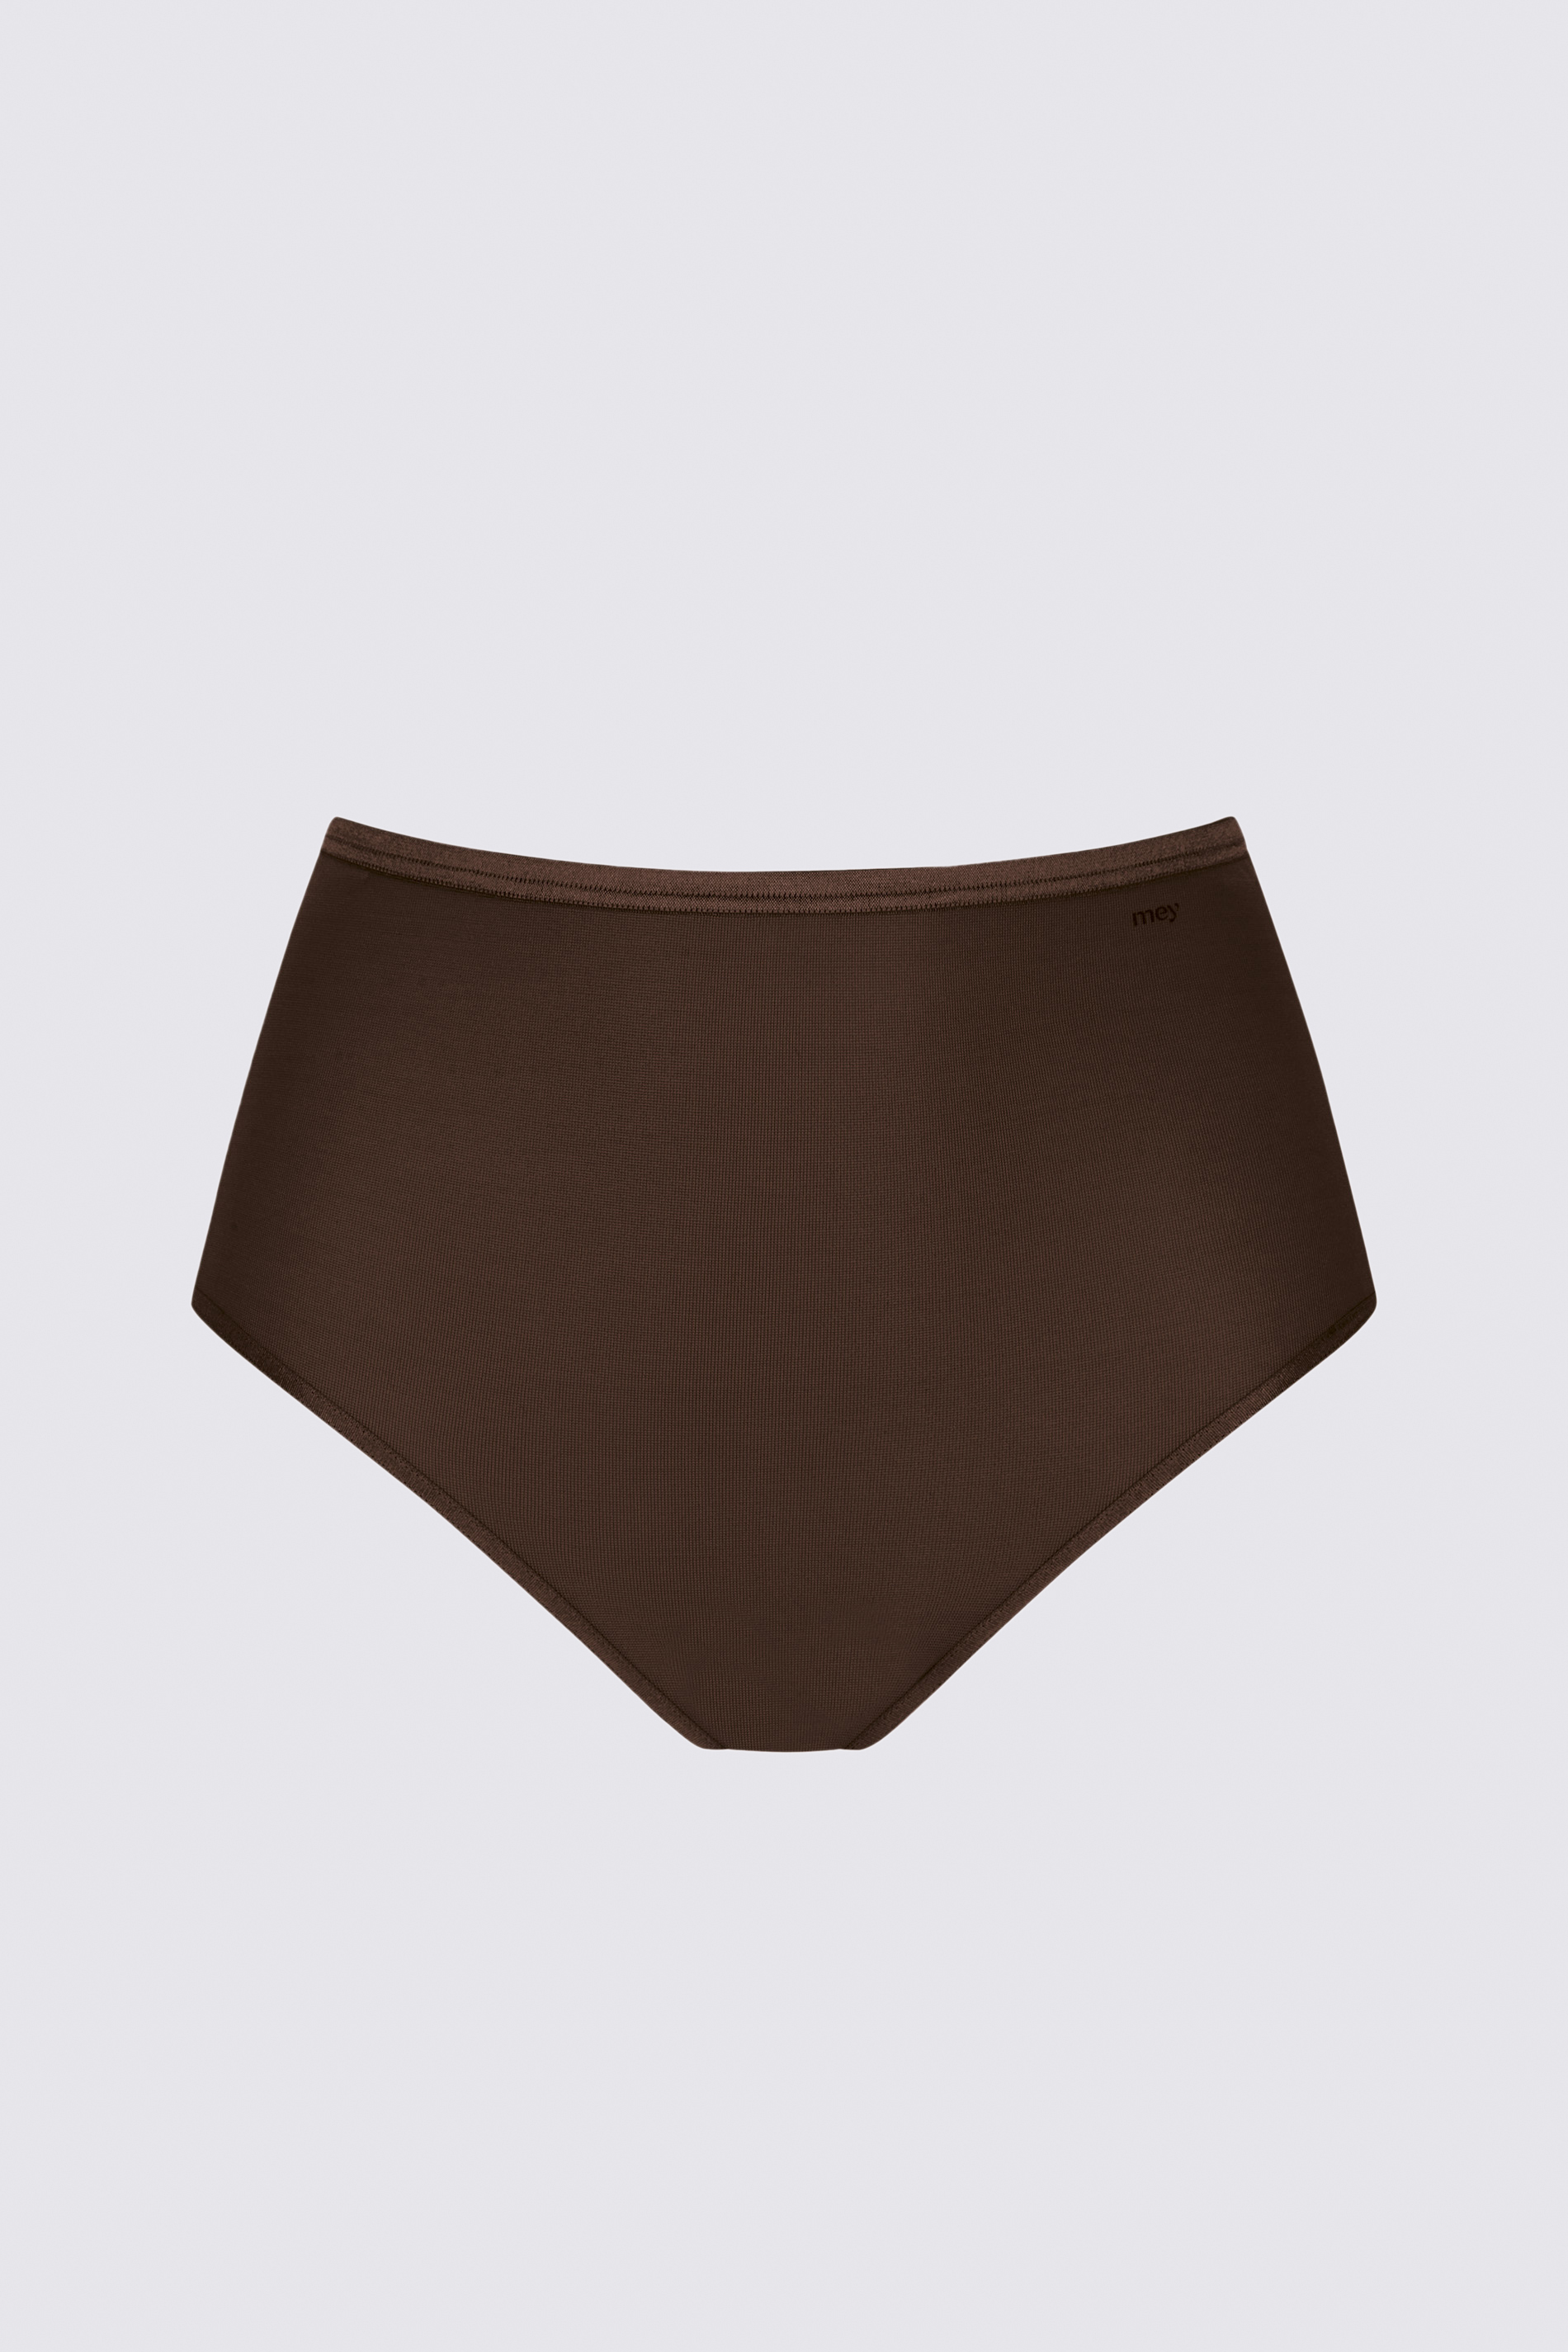 Tailleslip Liquorice Brown Serie Emotion Uitknippen | mey®